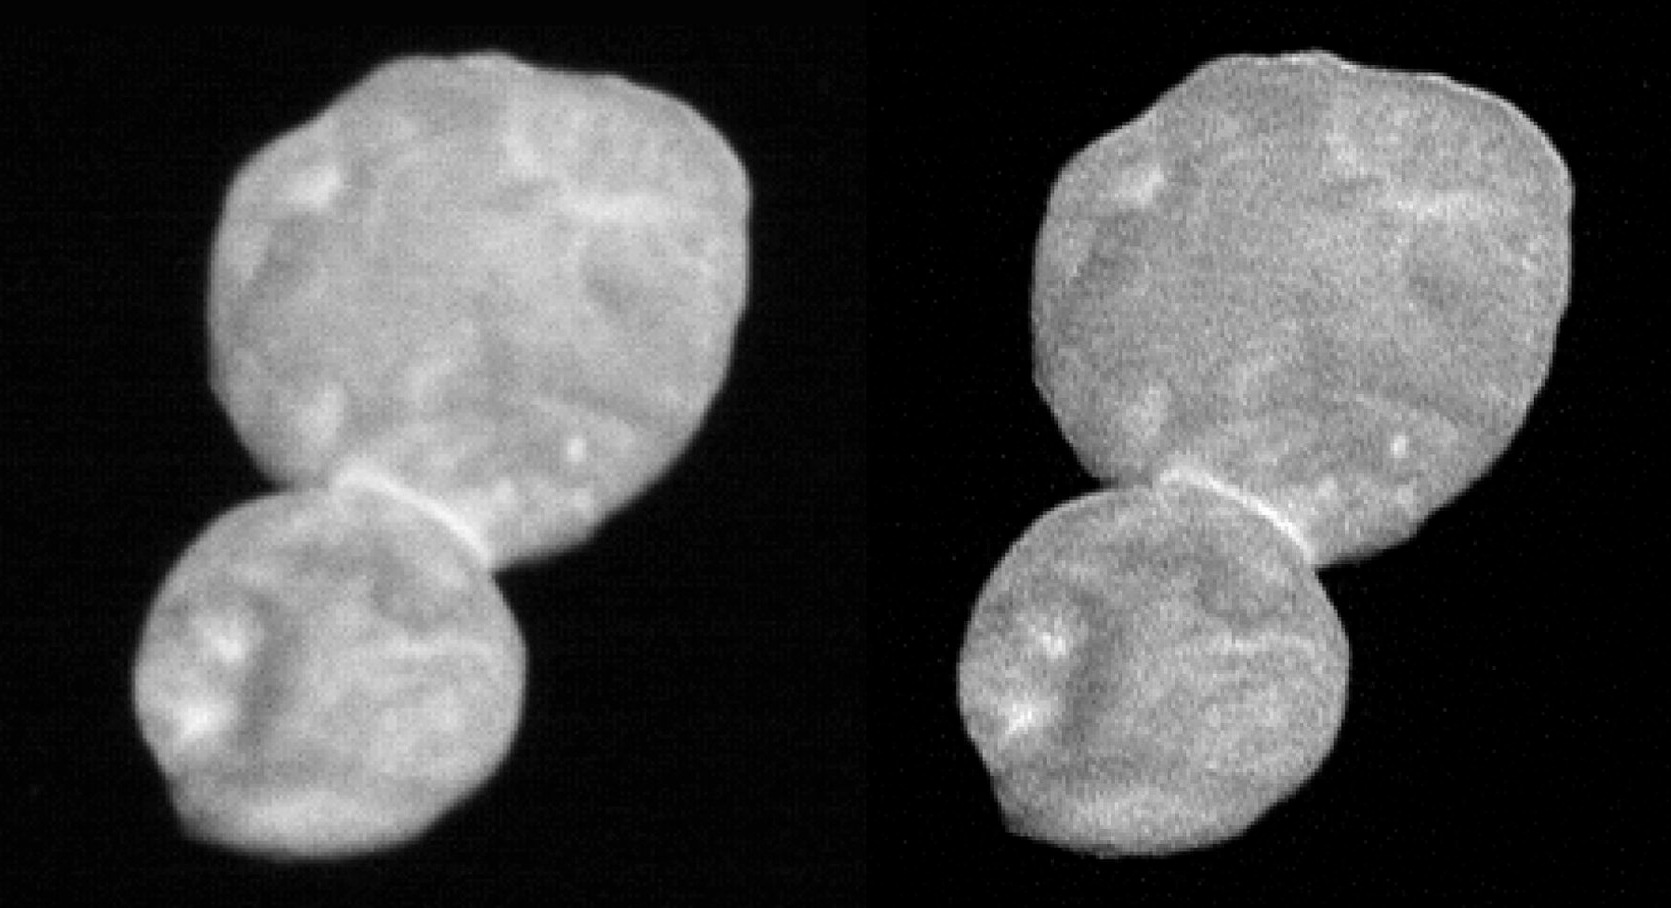 A photo of 2014 MU69, taken by NASA's New Horizons probe just 30 minutes before its closest approach on January 1, 2019. At left is a raw spacecraft image, and at right is a sharpened version. (NASA/JHUAPL/SwRI)